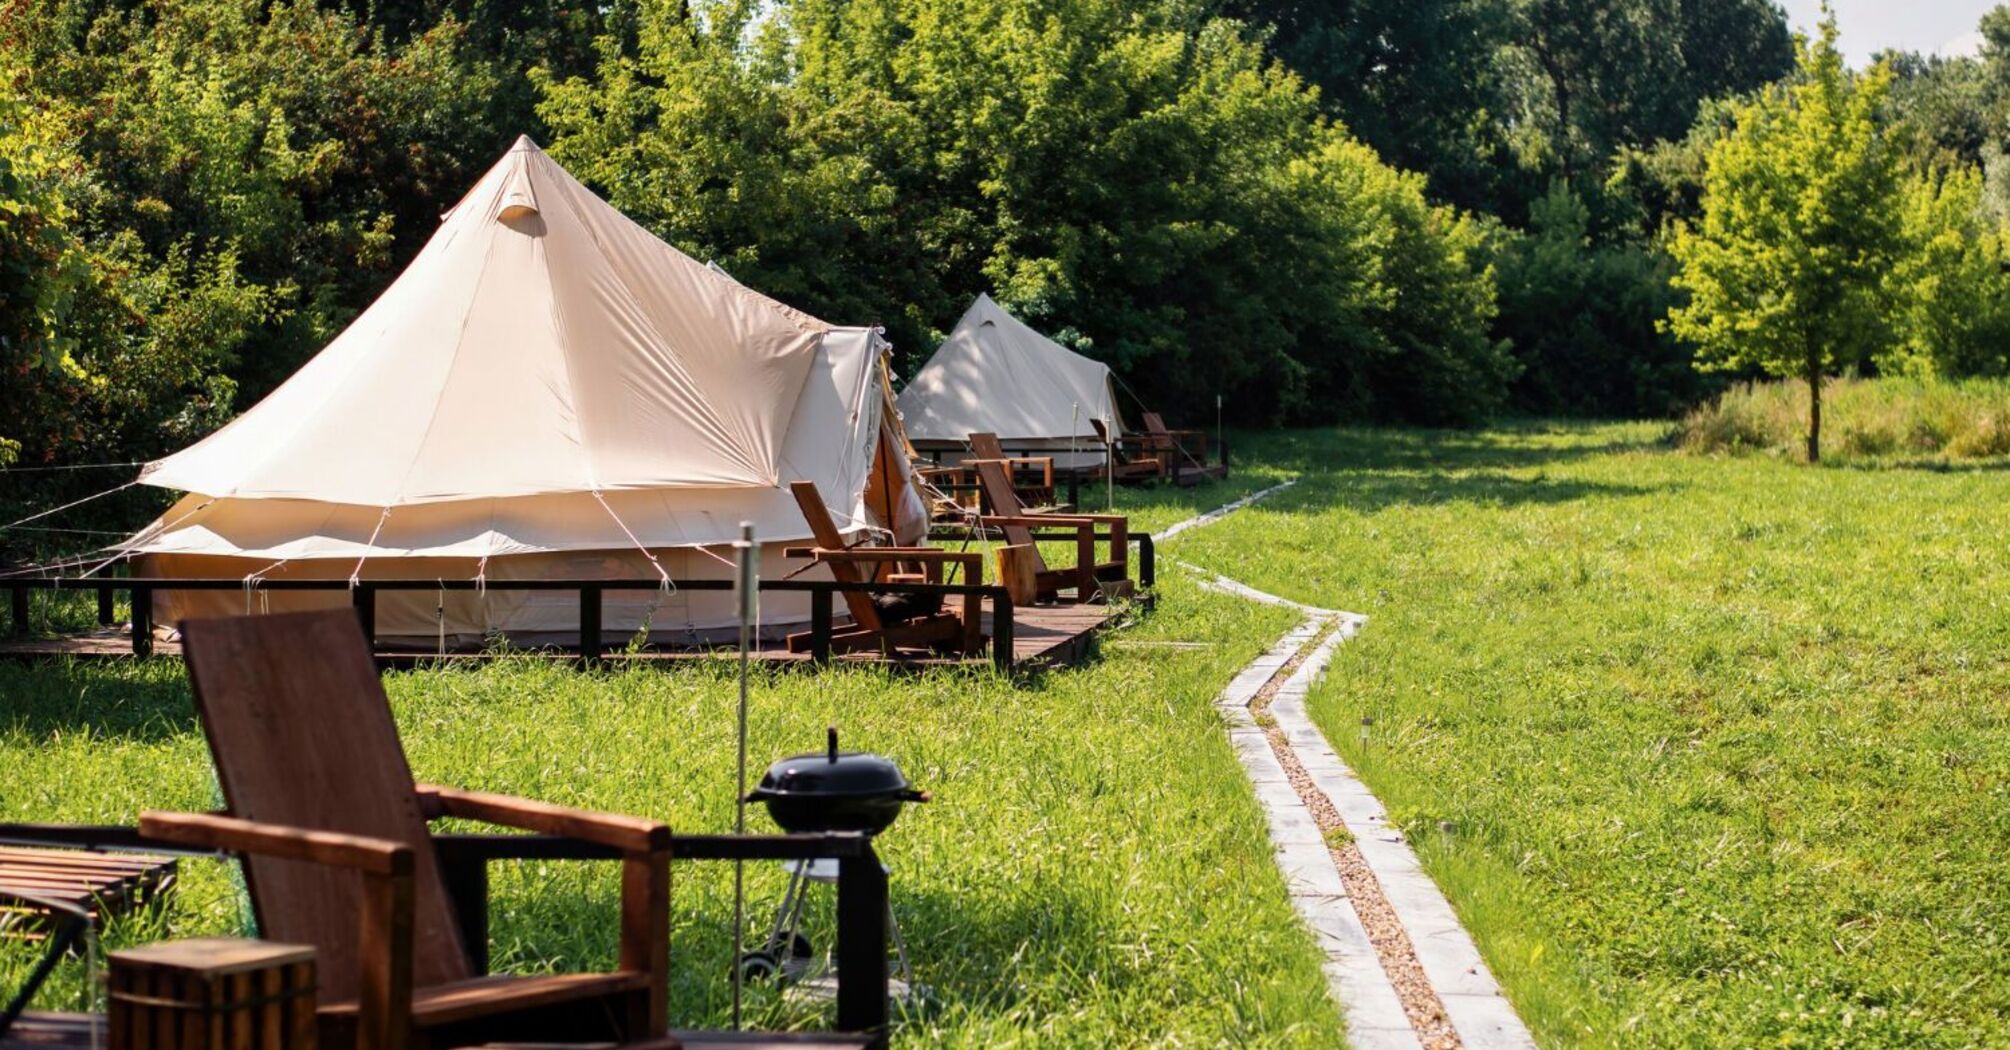 Best French campsites: 8 places on the coast to relax with a tent